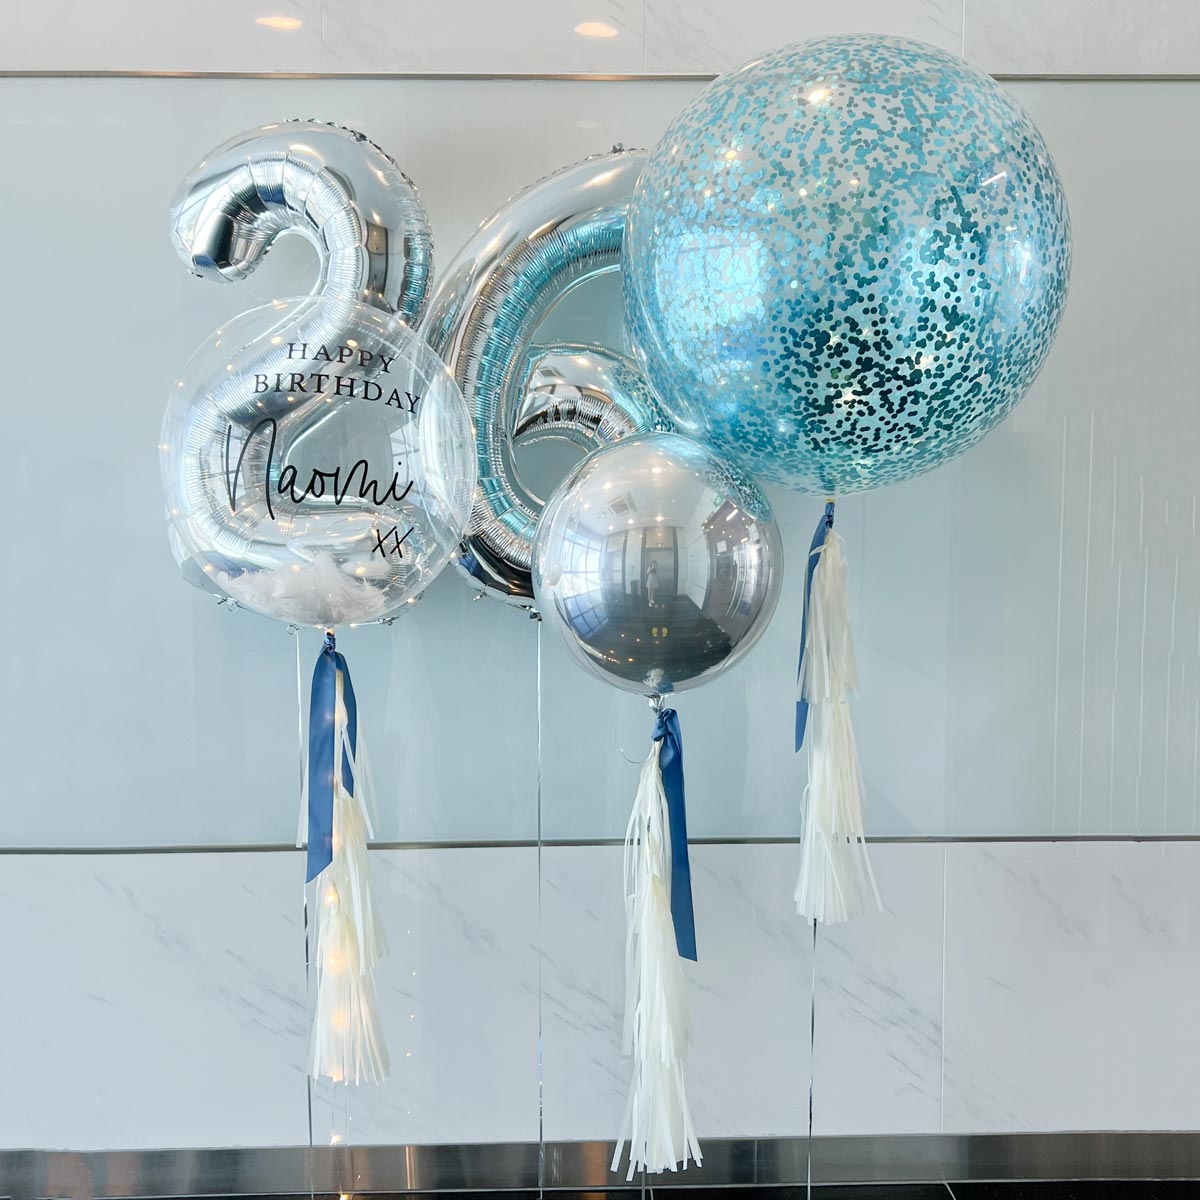 24inch Customised Designer Bubble Balloon with Stuffed Mini-Balloons - Classy Birthday Design + Optional Giant Number Balloons